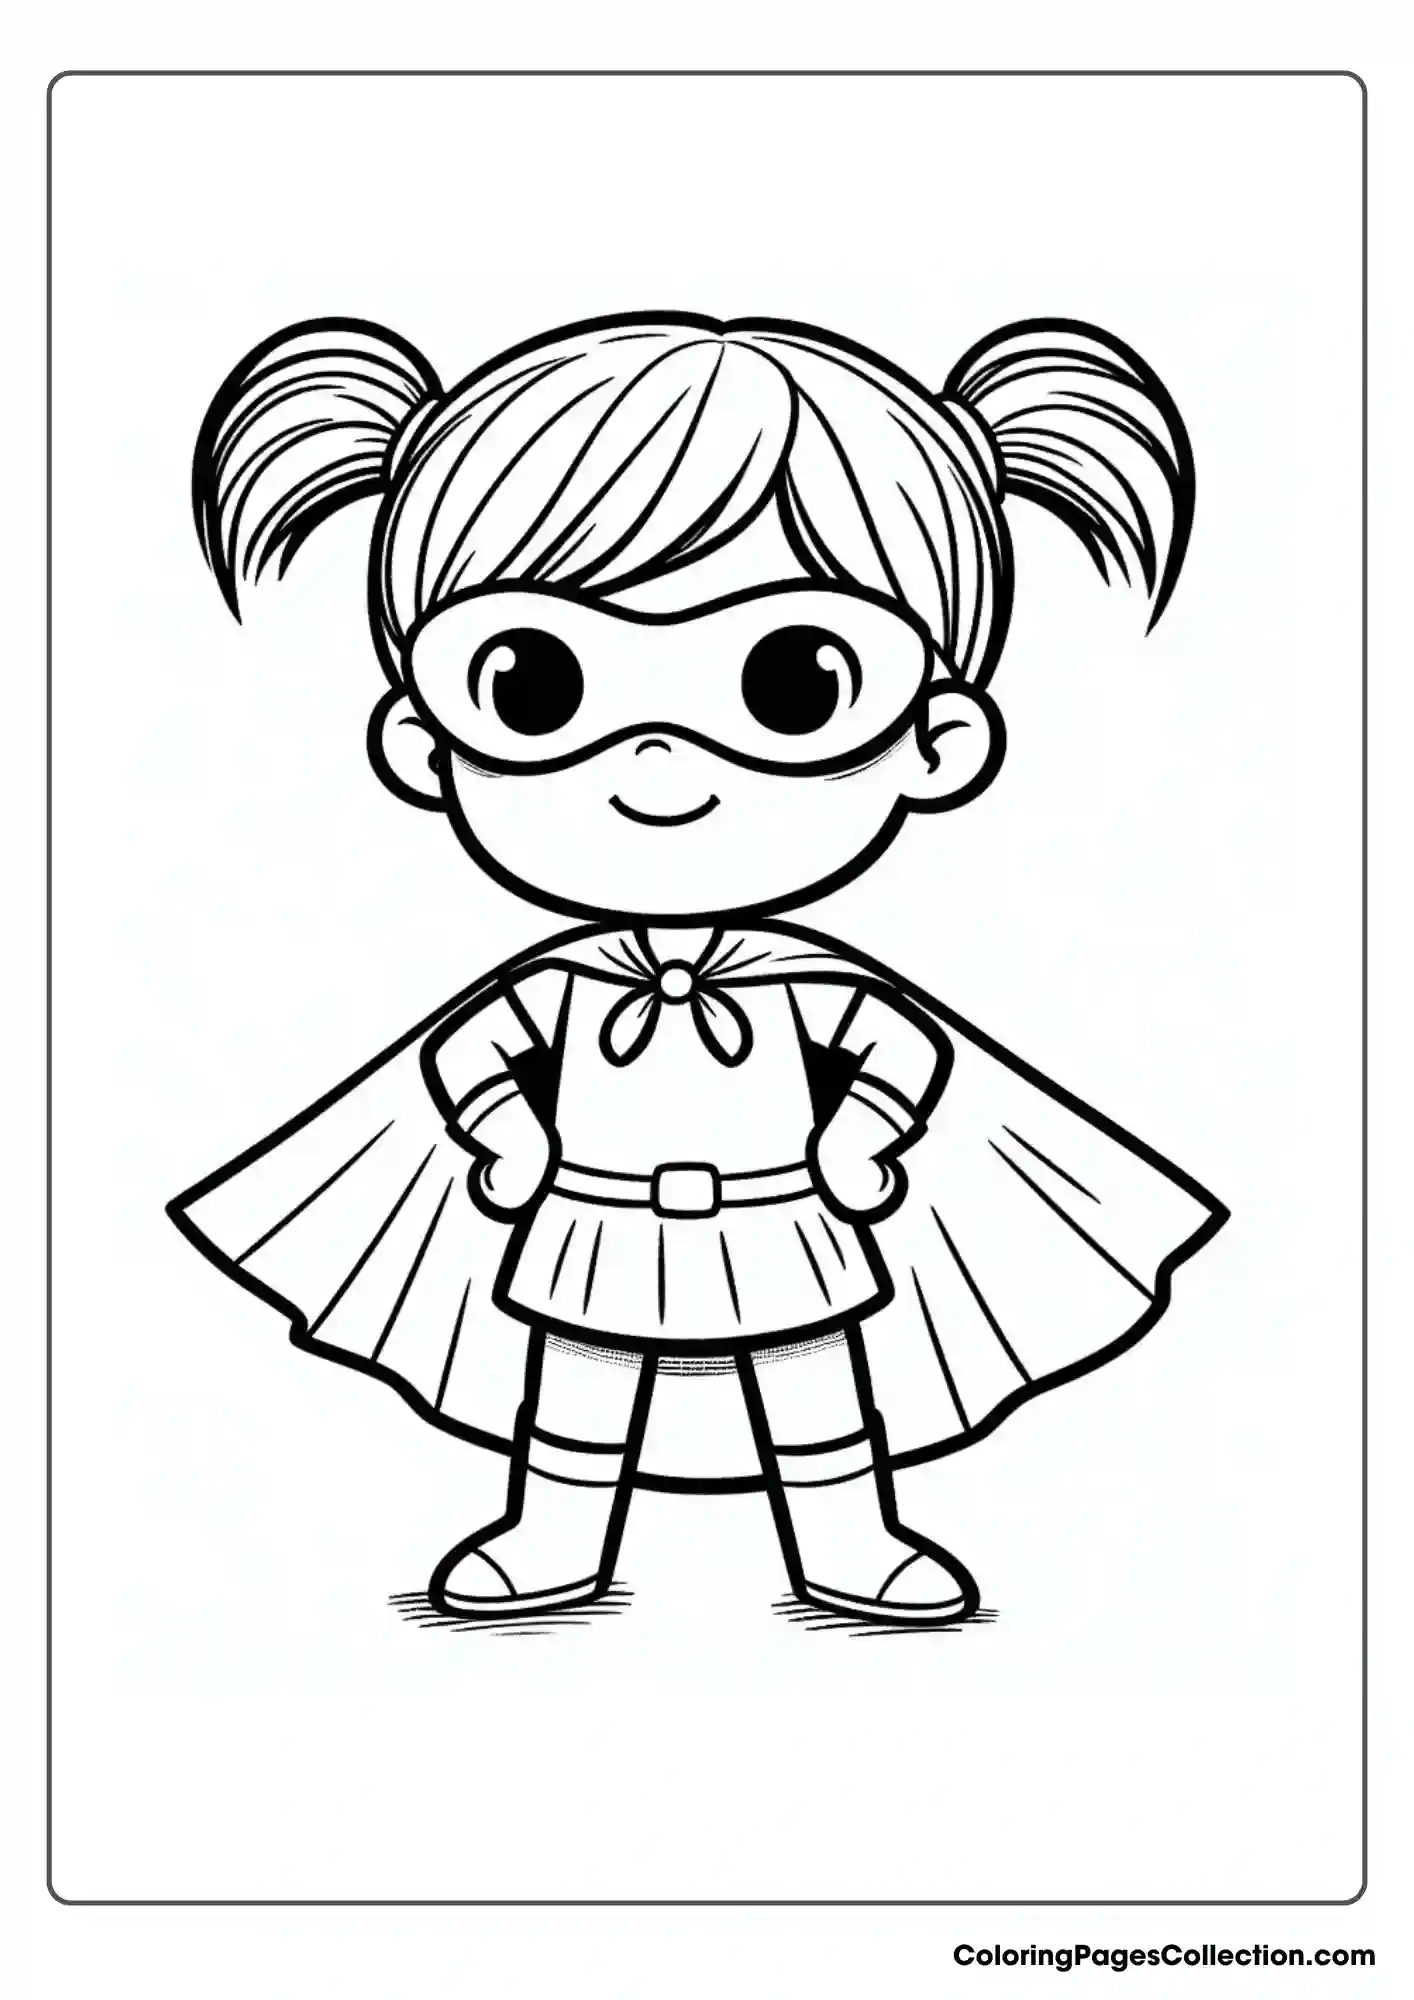 Superhero Coloring Pages For Kids